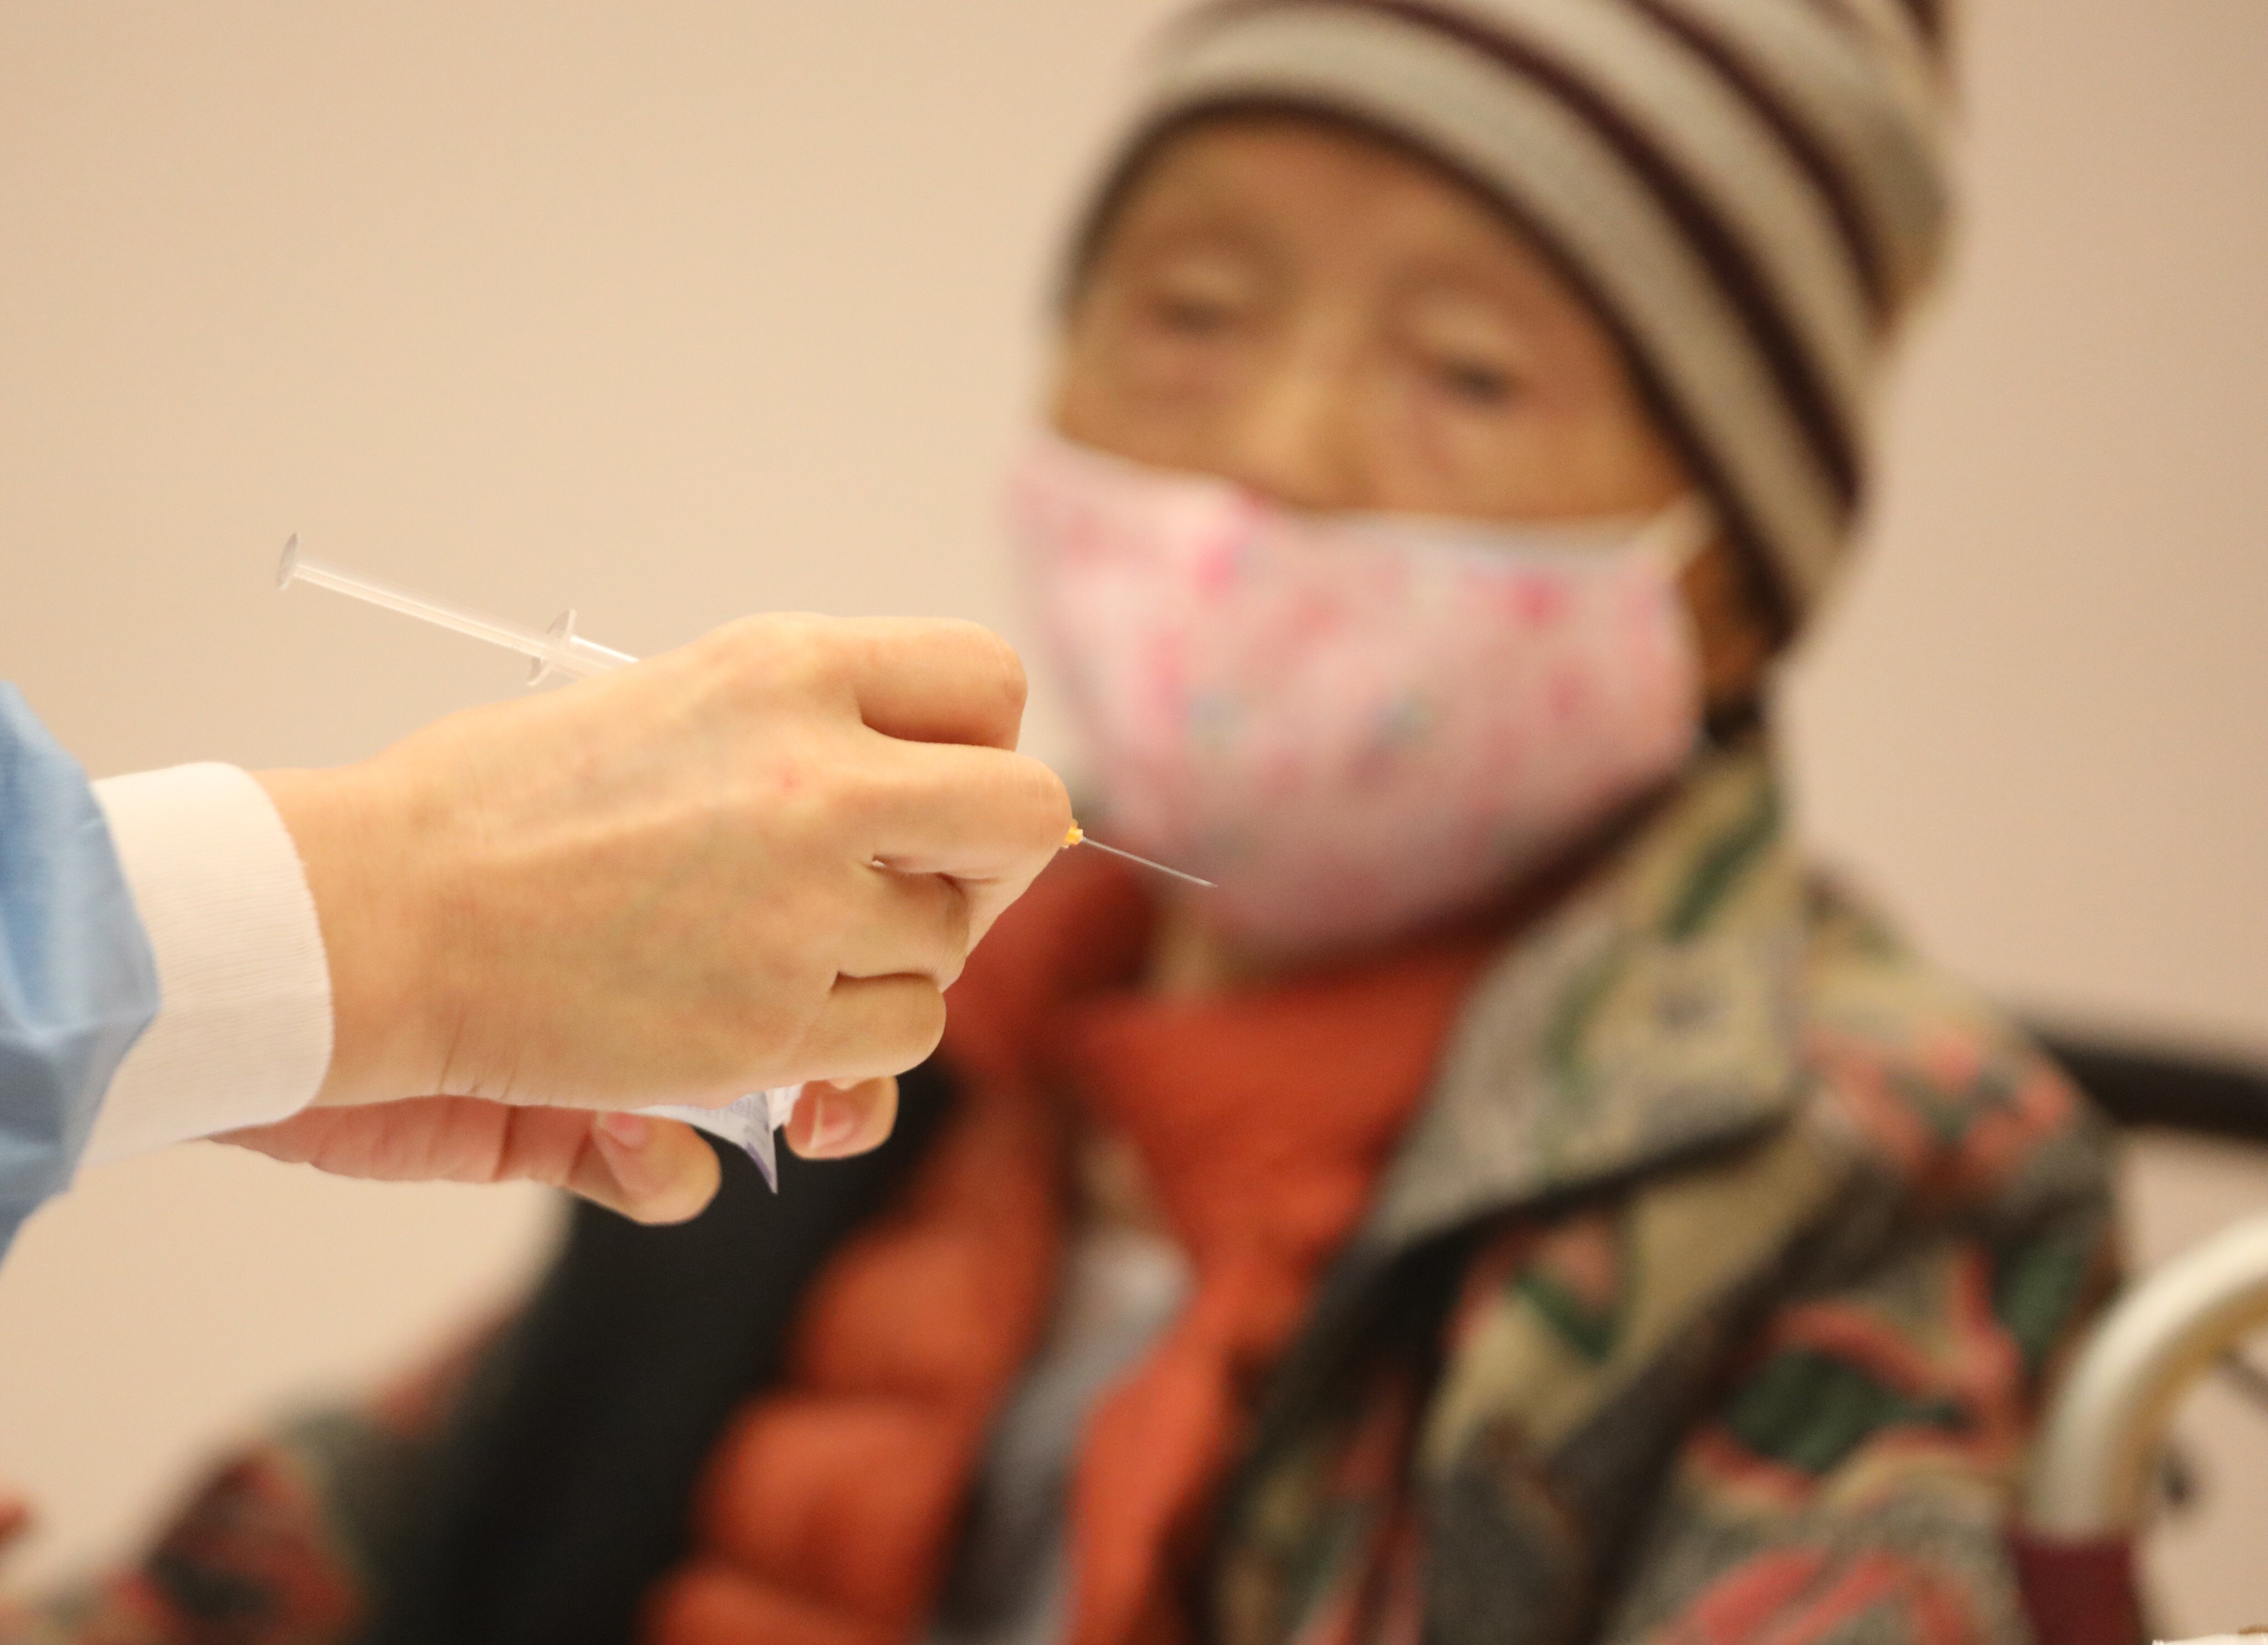 Most deaths amid Hong Kong’s fifth wave involve the elderly, who have the lowest vaccination rate among the population. Photo: Jelly Tse